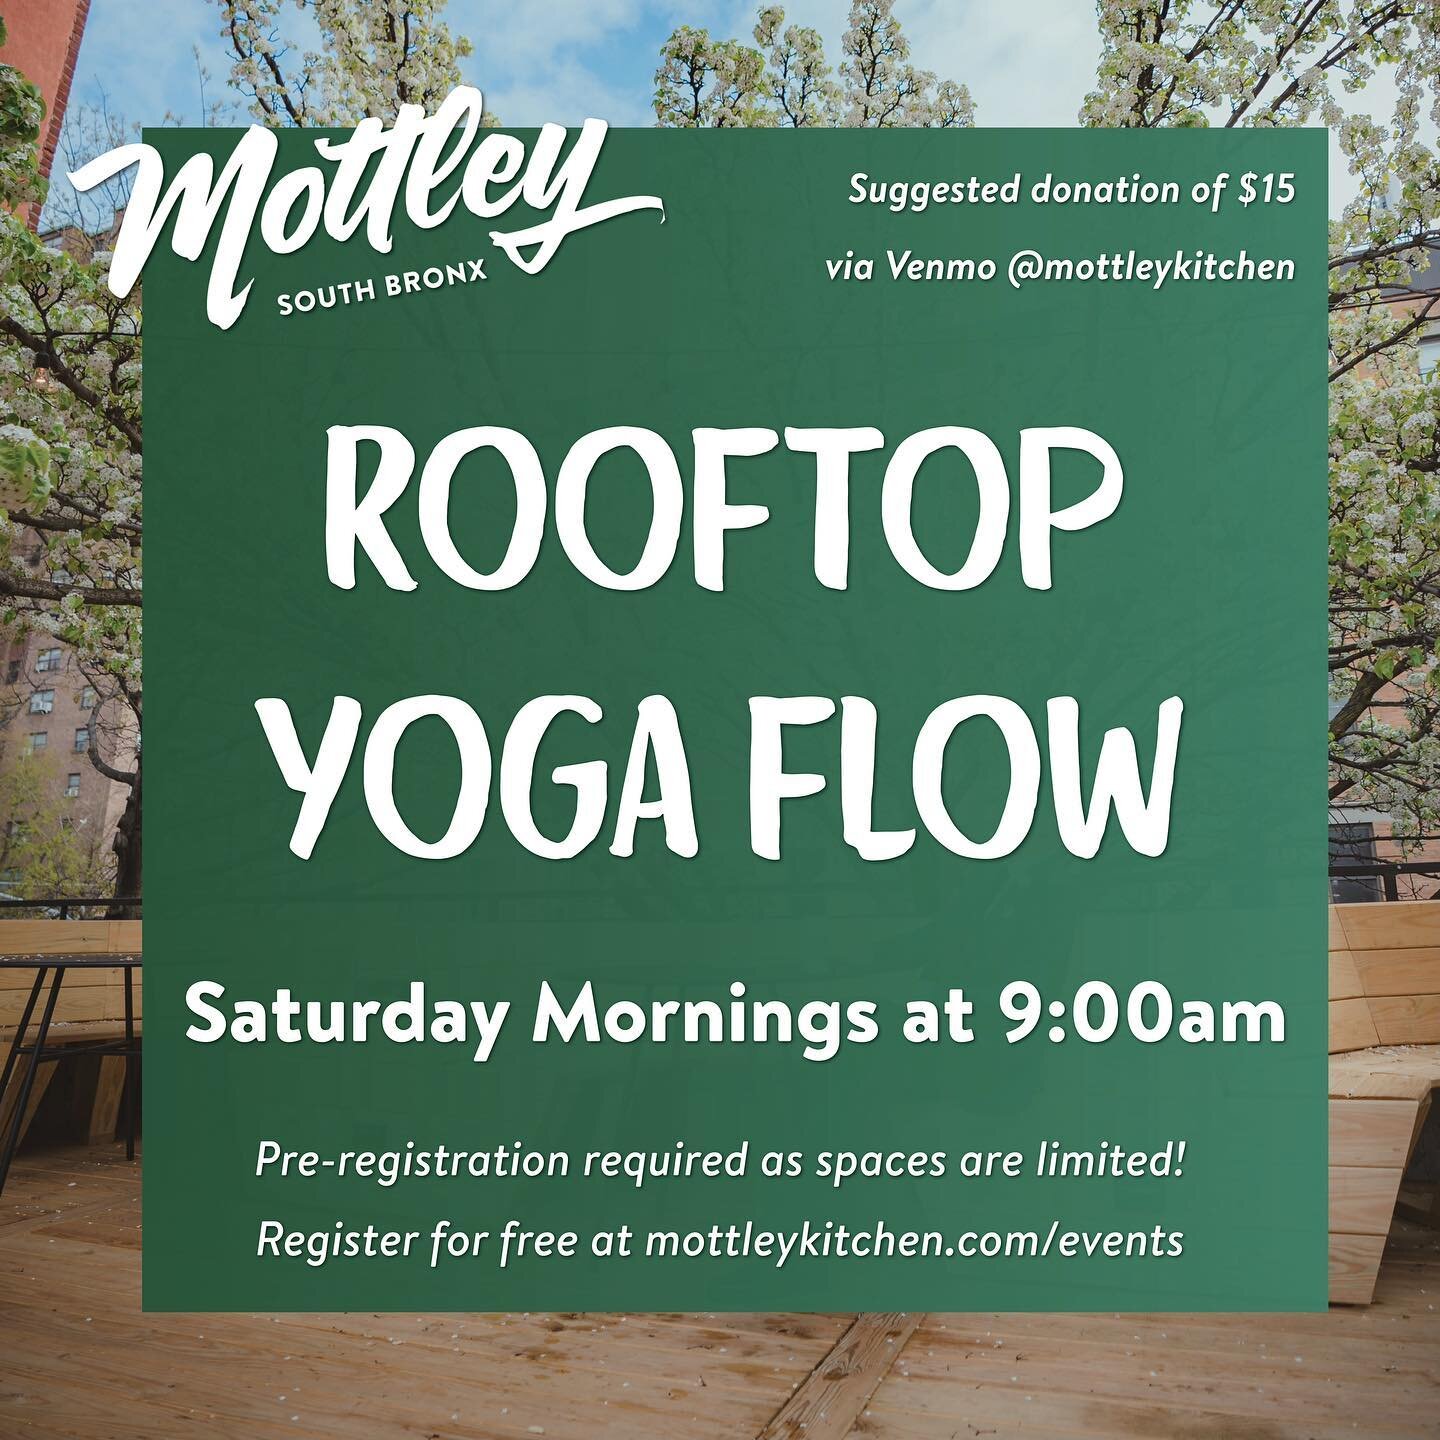 YOGA IS BACK 🙌

Come flow with the Mottley Crew for&nbsp;Saturday Morning Rooftop Yoga. Join Ora Kemp (RYT-500) at 9:00am all summer long as she guides us through a 60-minute open-level vinyassa&nbsp;class. The flow is donation-based and designed fo